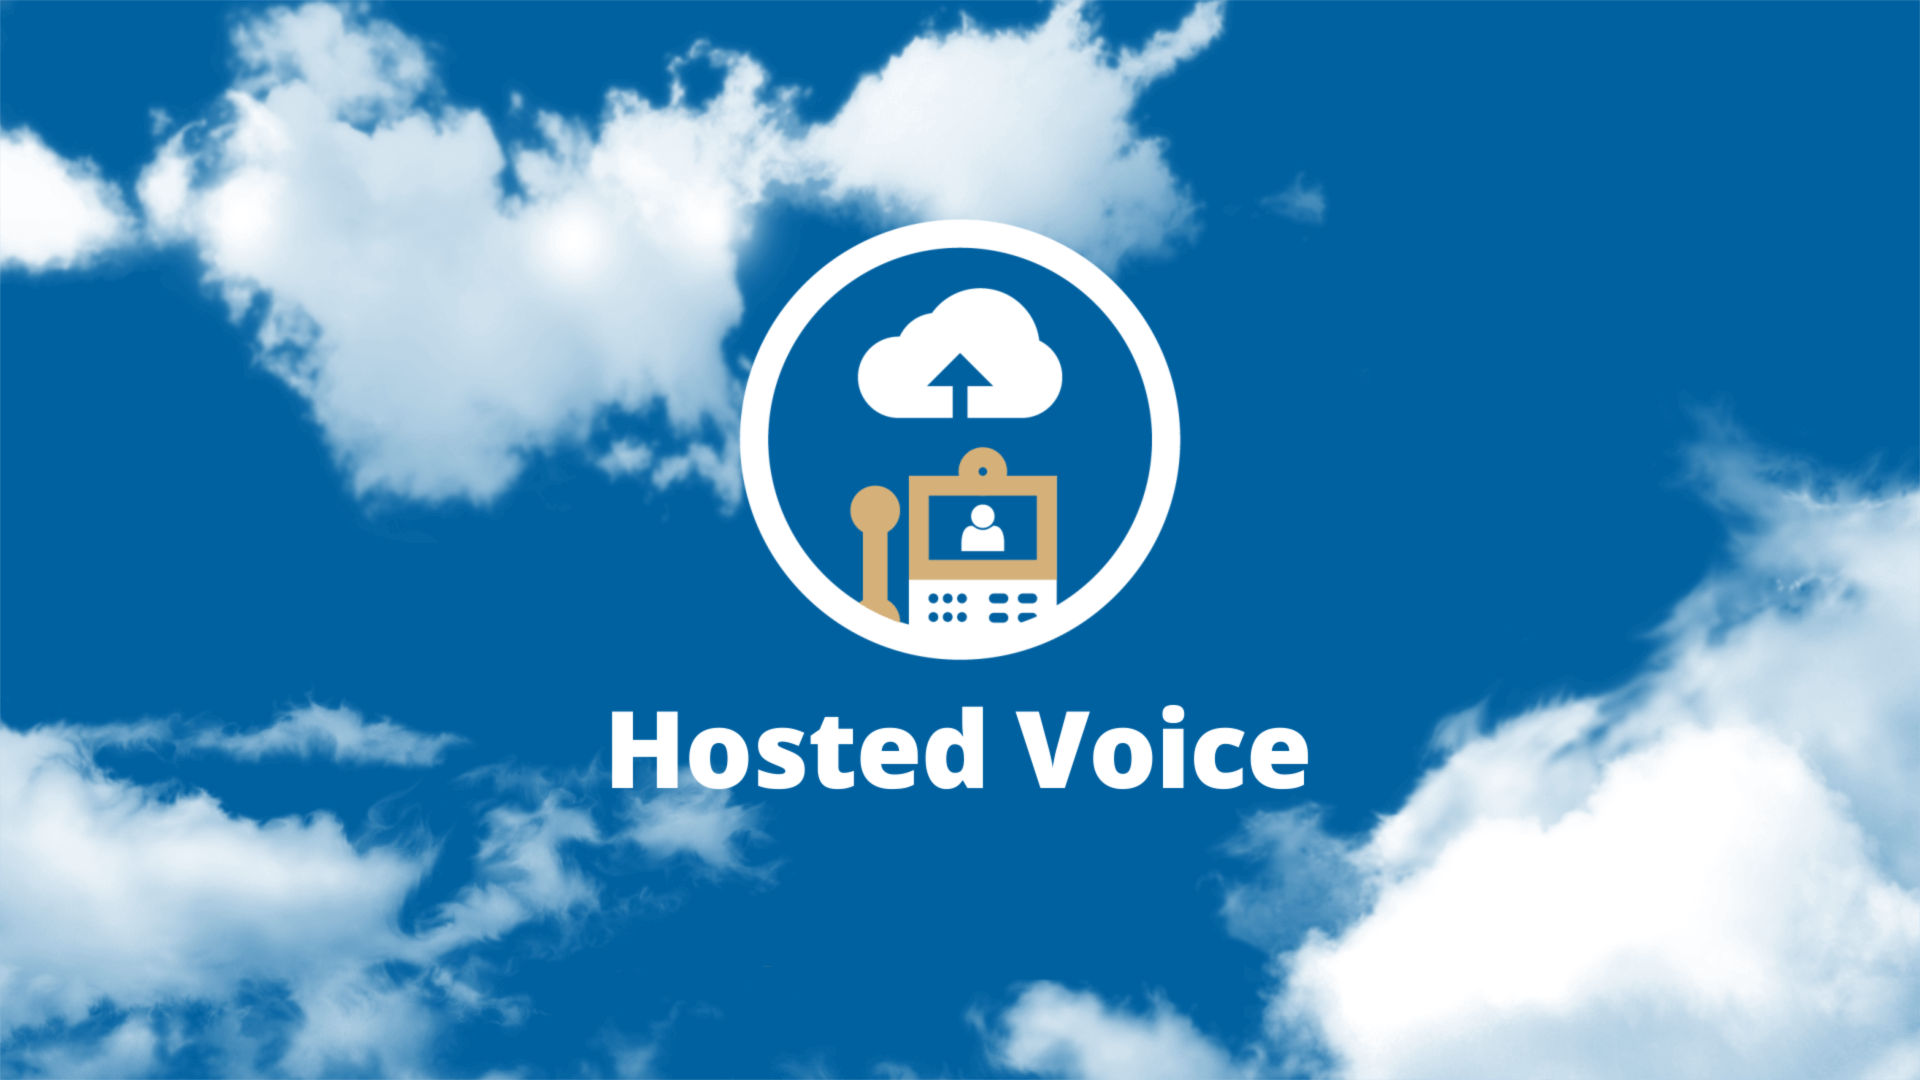 hosted voice icon and text on sky background with clouds